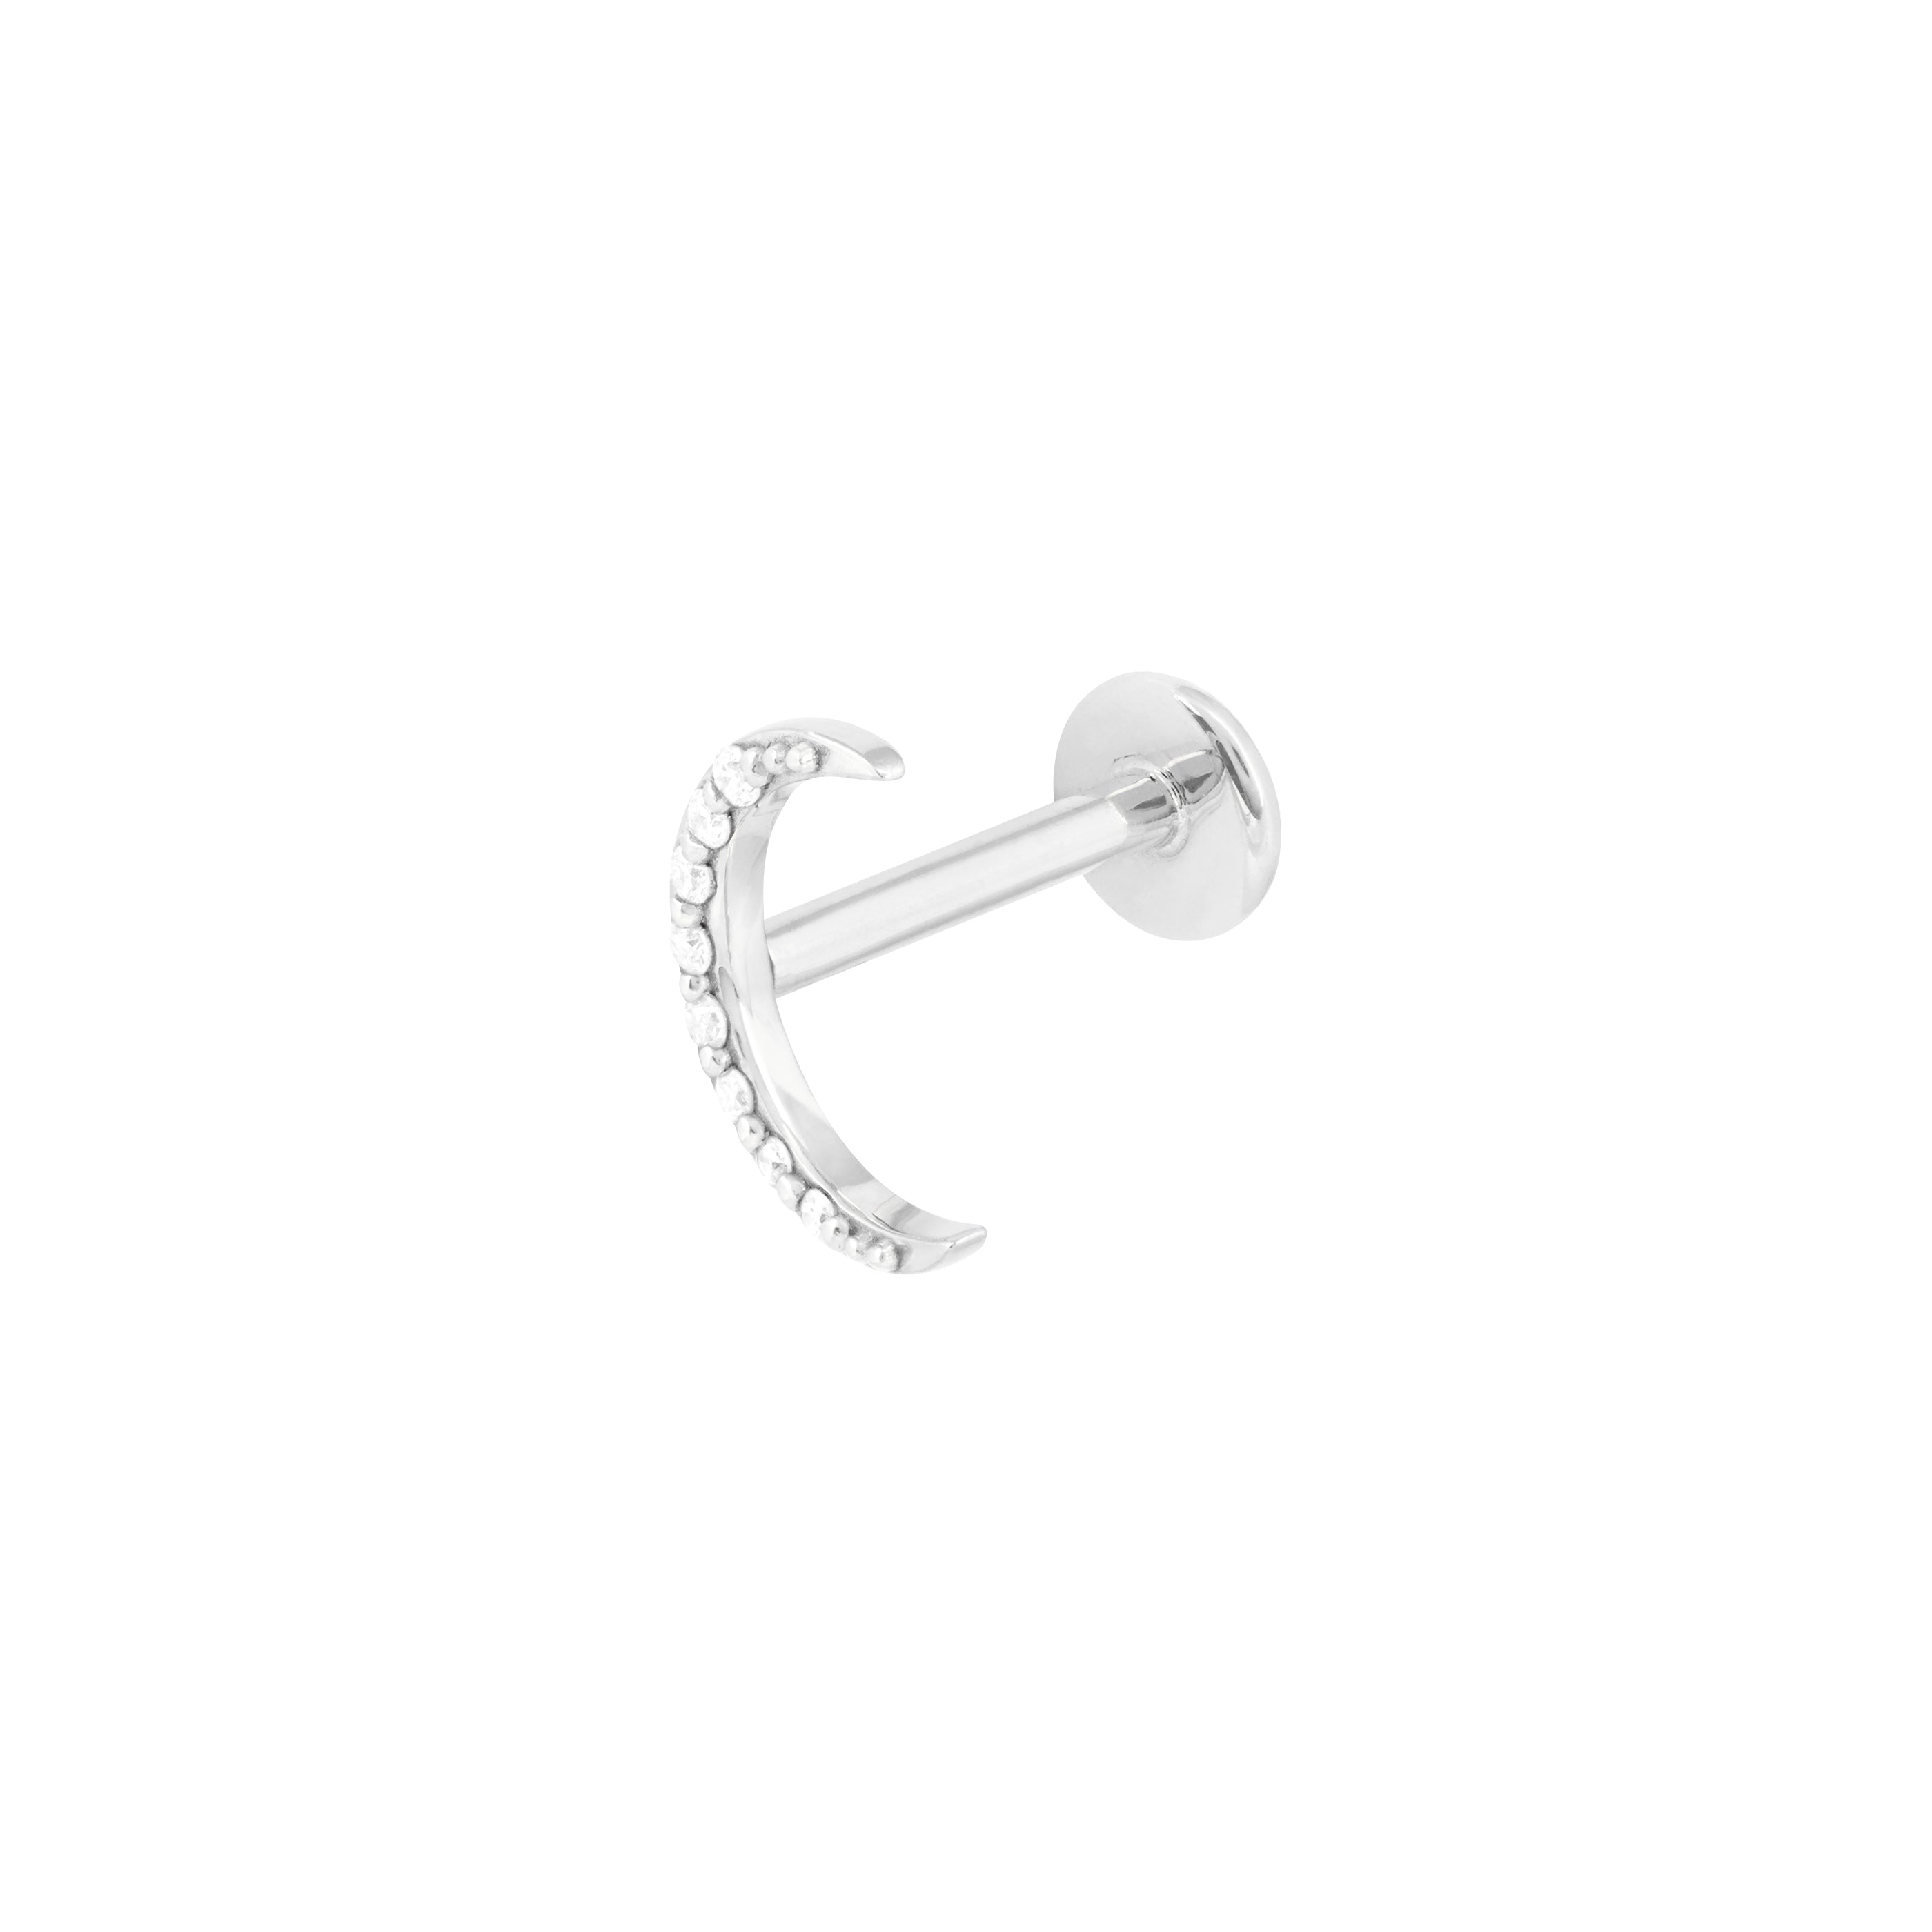 Solid White Gold Topaz Moon Piercing Stud